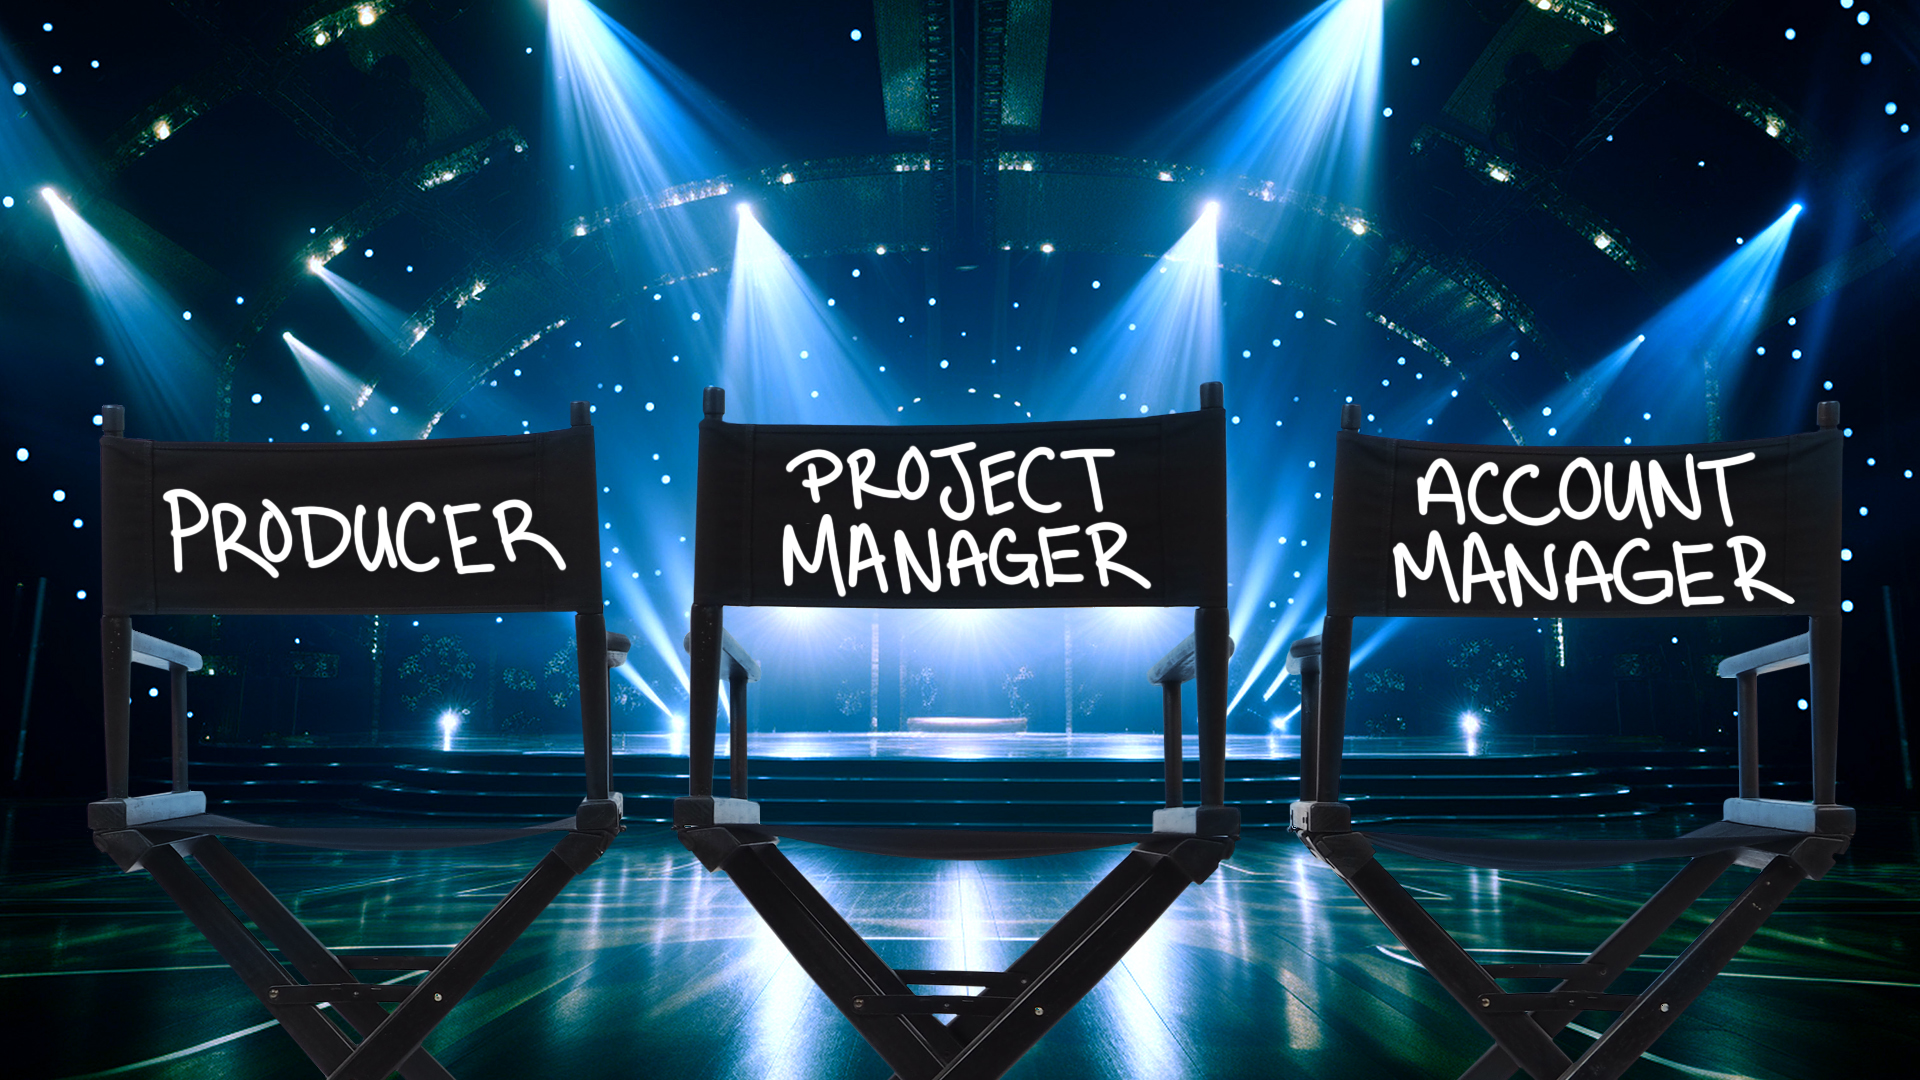 Event Planner, Producer, Project Manager: What’s the Difference?